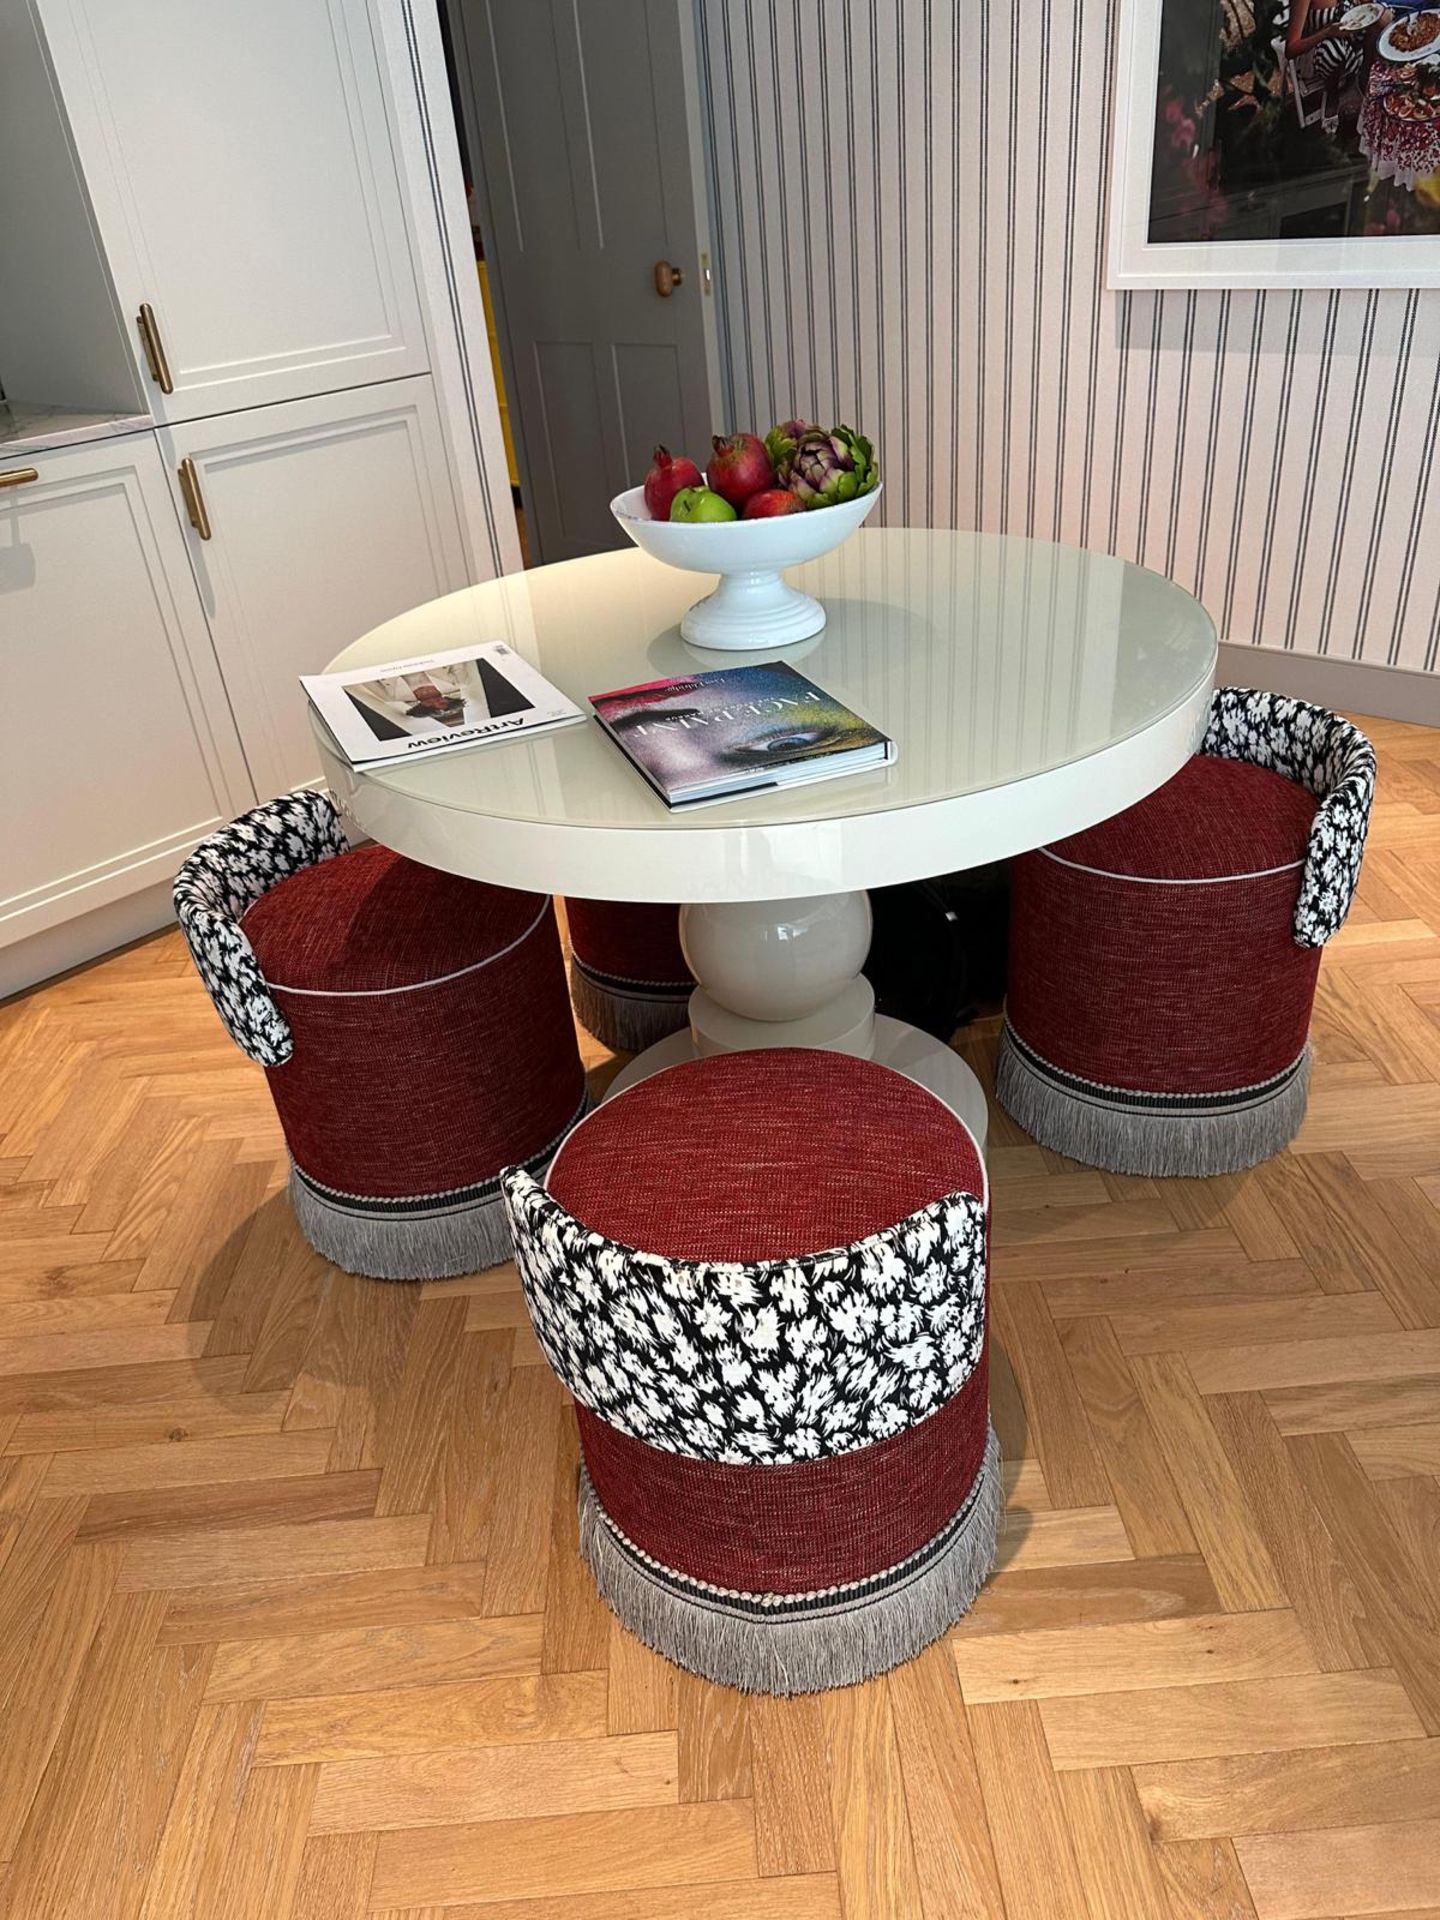 A Set 4 Retro-Style Upholstered Signature Pouf Chairs - The Ultimate Dining Seats Designed For - Image 2 of 3